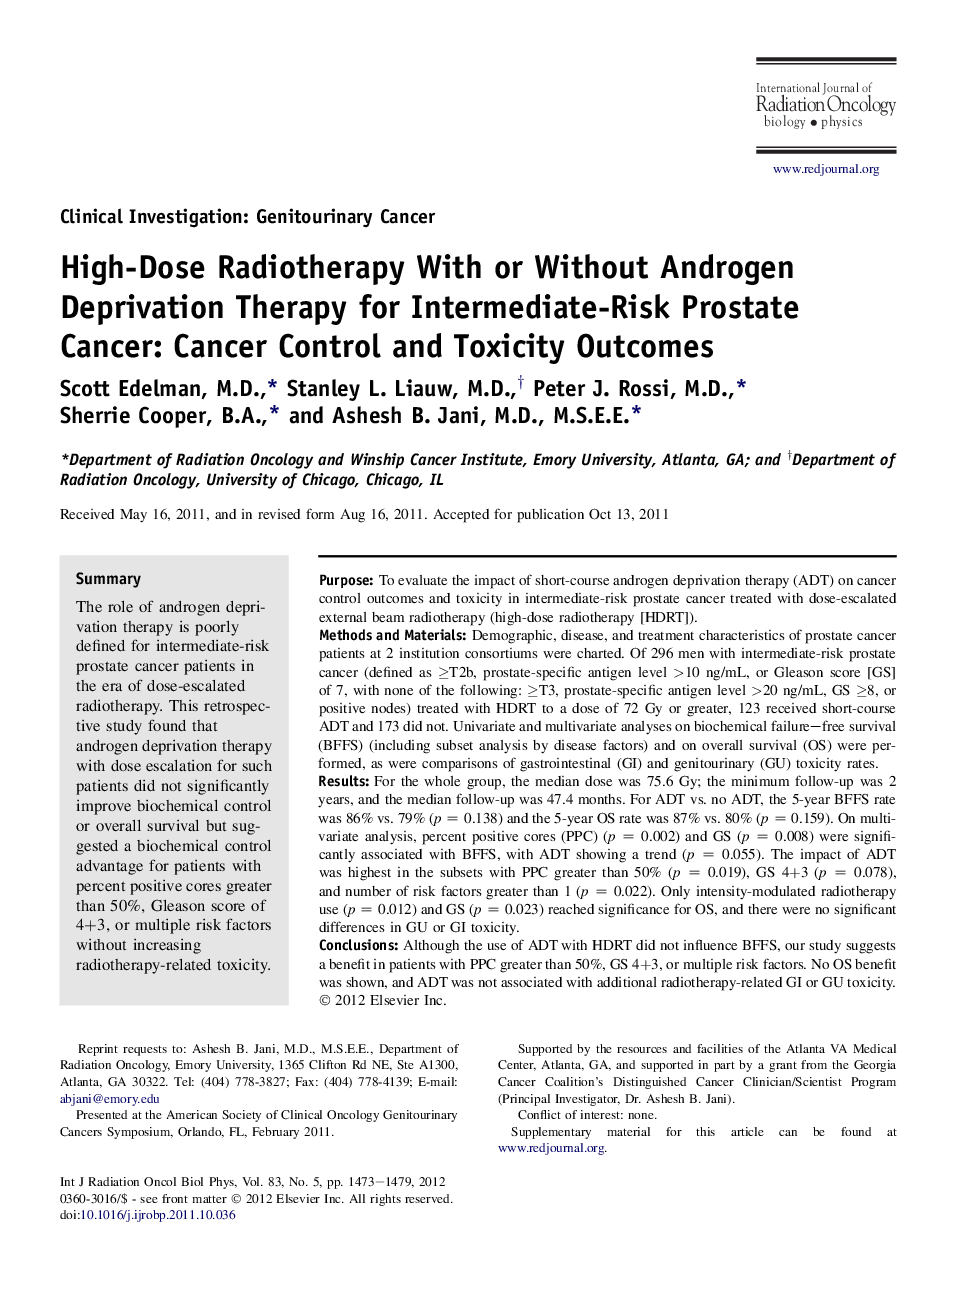 High-Dose Radiotherapy With or Without Androgen Deprivation Therapy for Intermediate-Risk Prostate Cancer: Cancer Control and Toxicity Outcomes